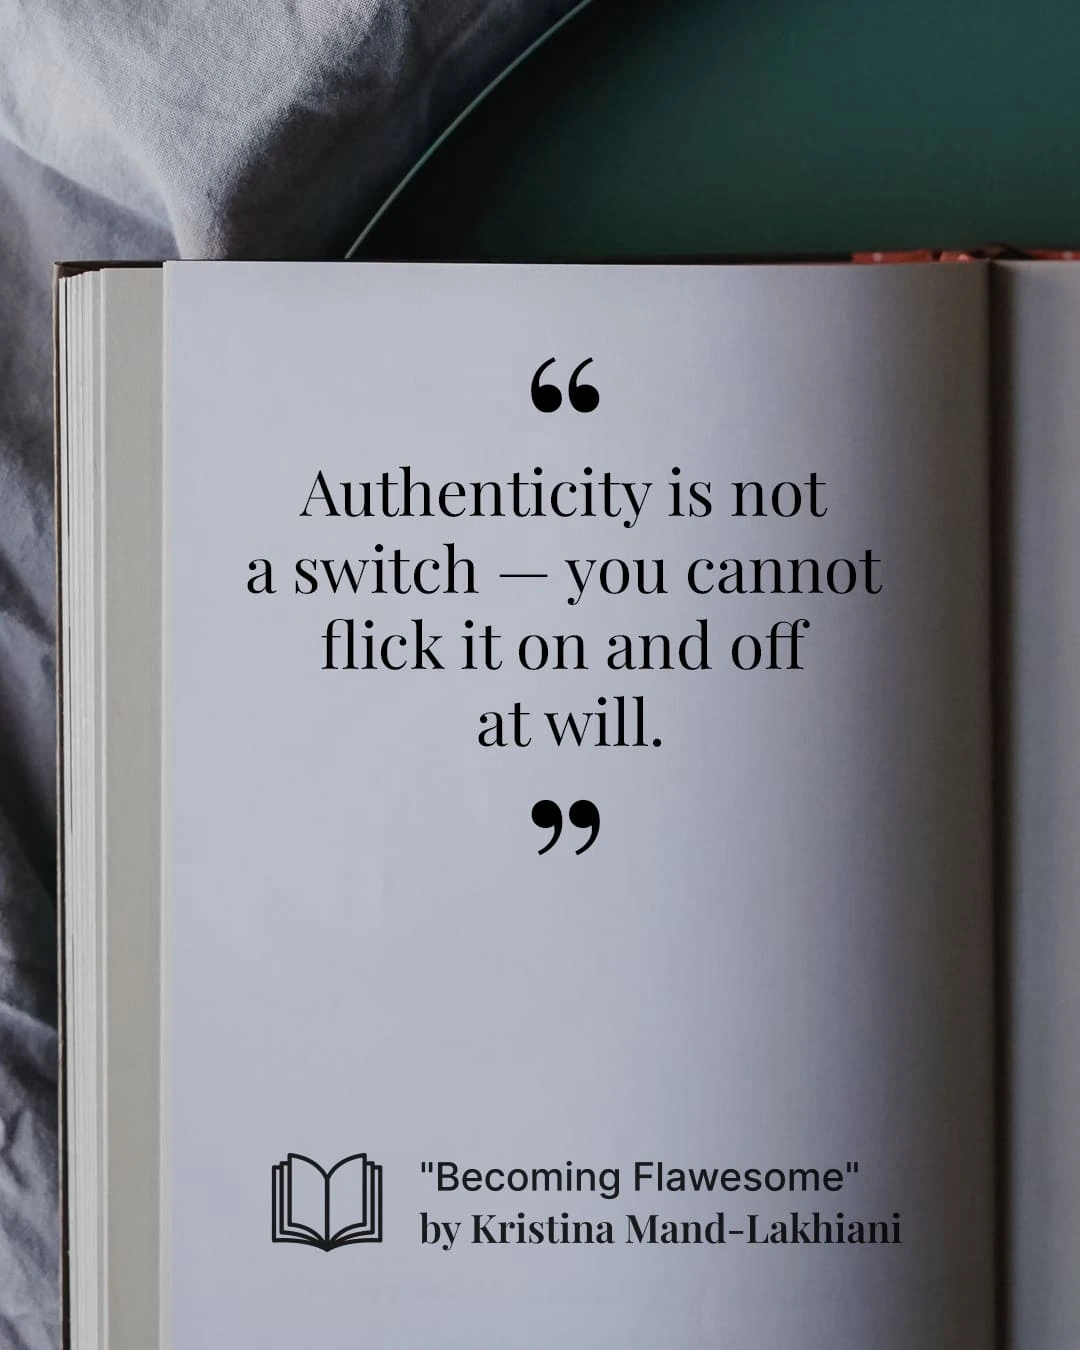 Kristina Mänd-Lakhiani quote about becoming flawesome